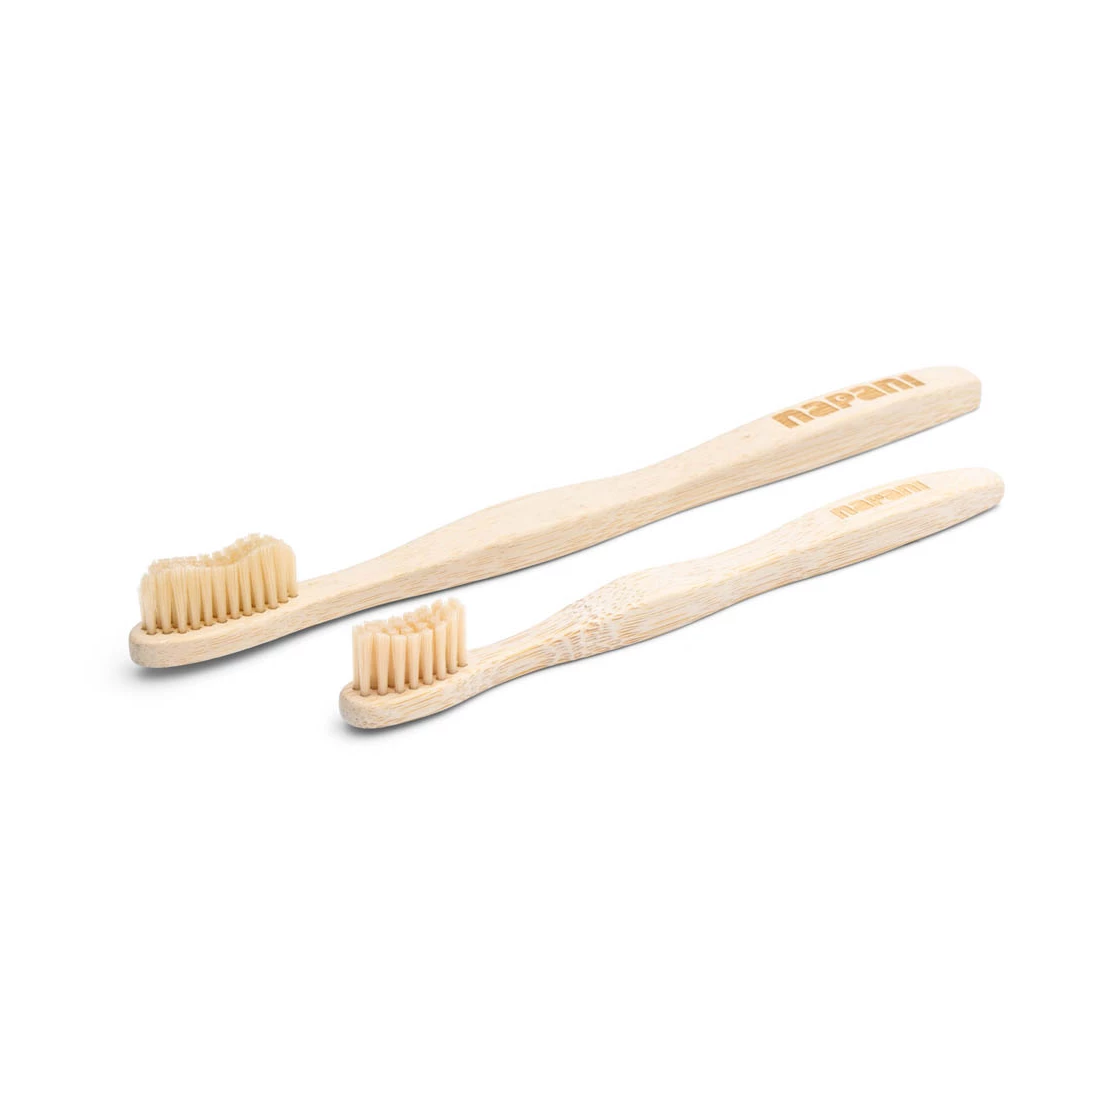 Dog toothbrush made from bamboo